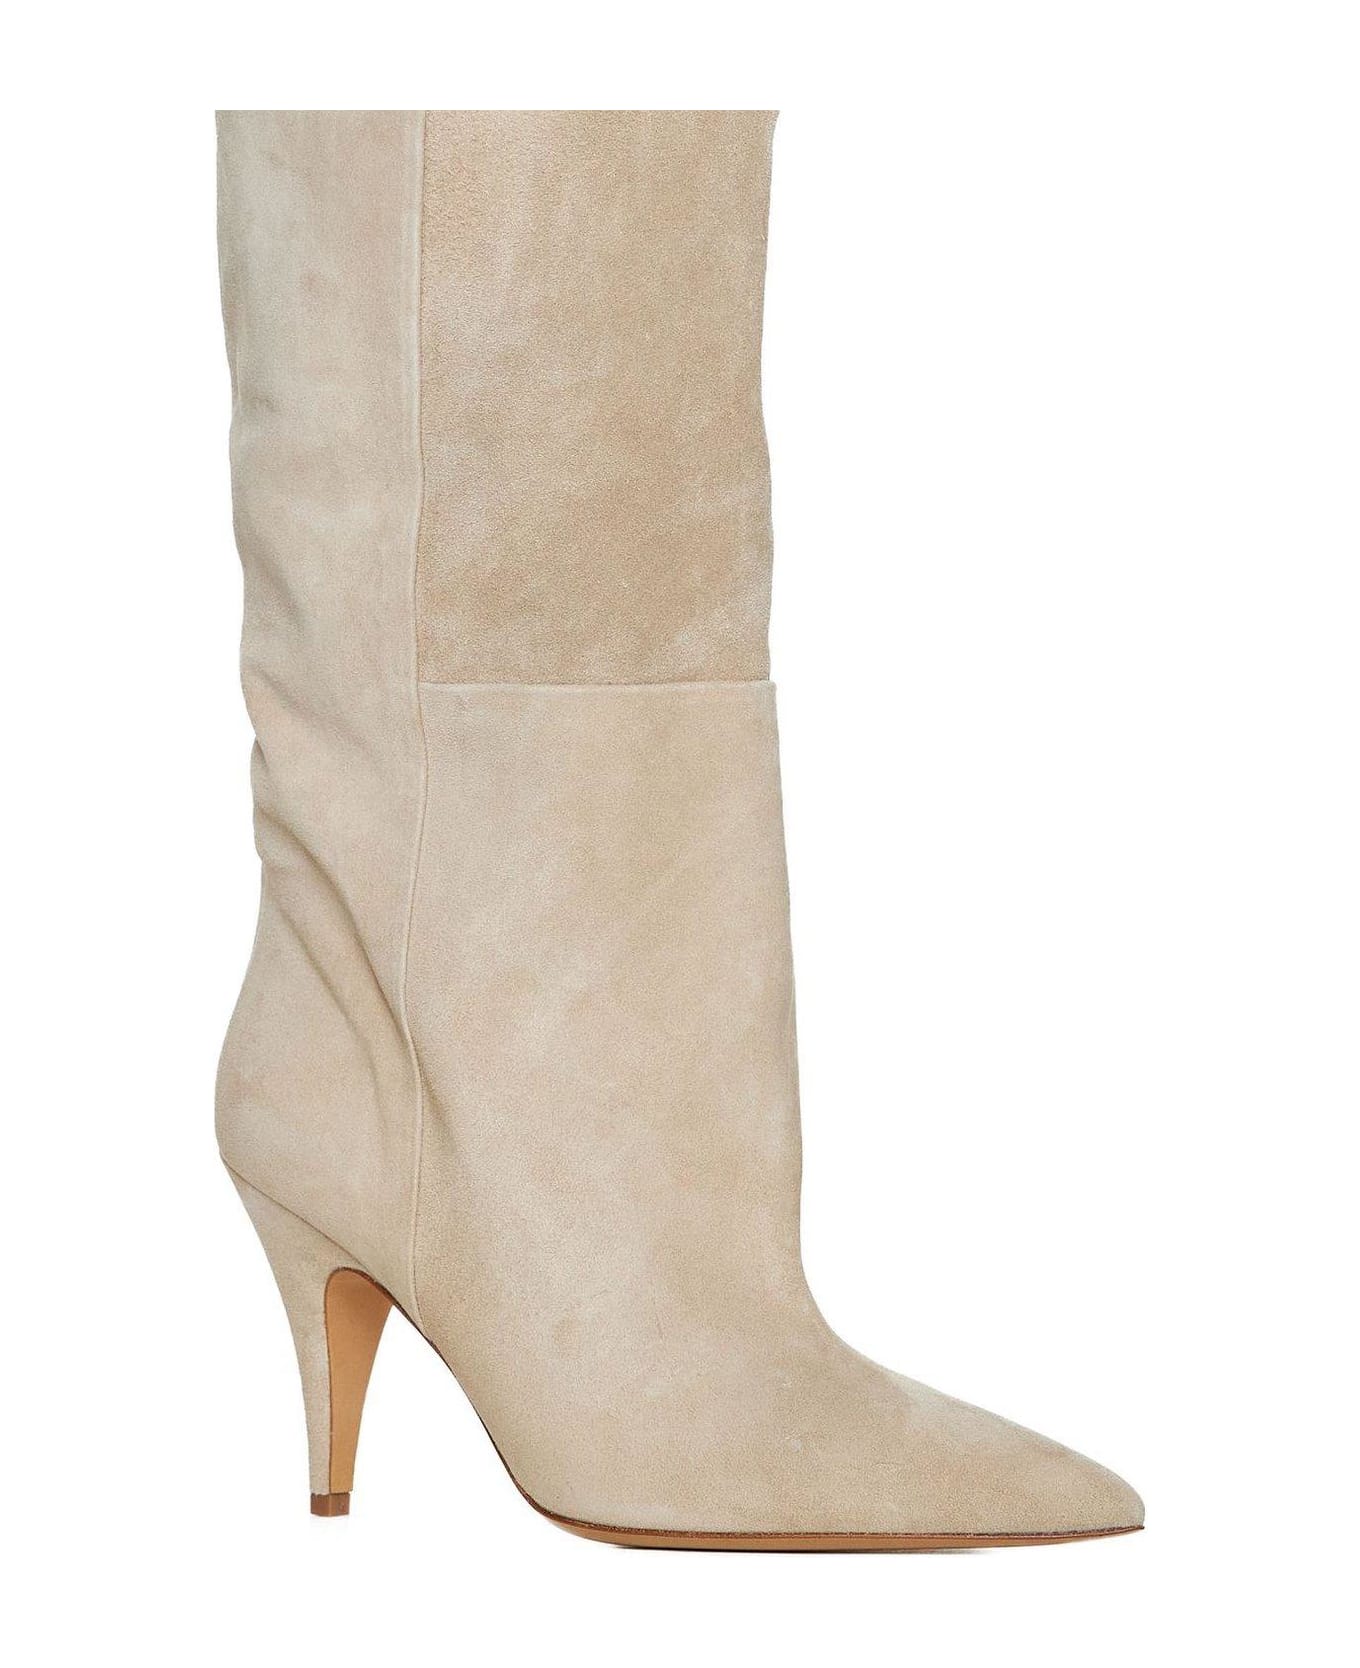 Khaite The River Pointed-toe Knee-high Boots - Beige suede